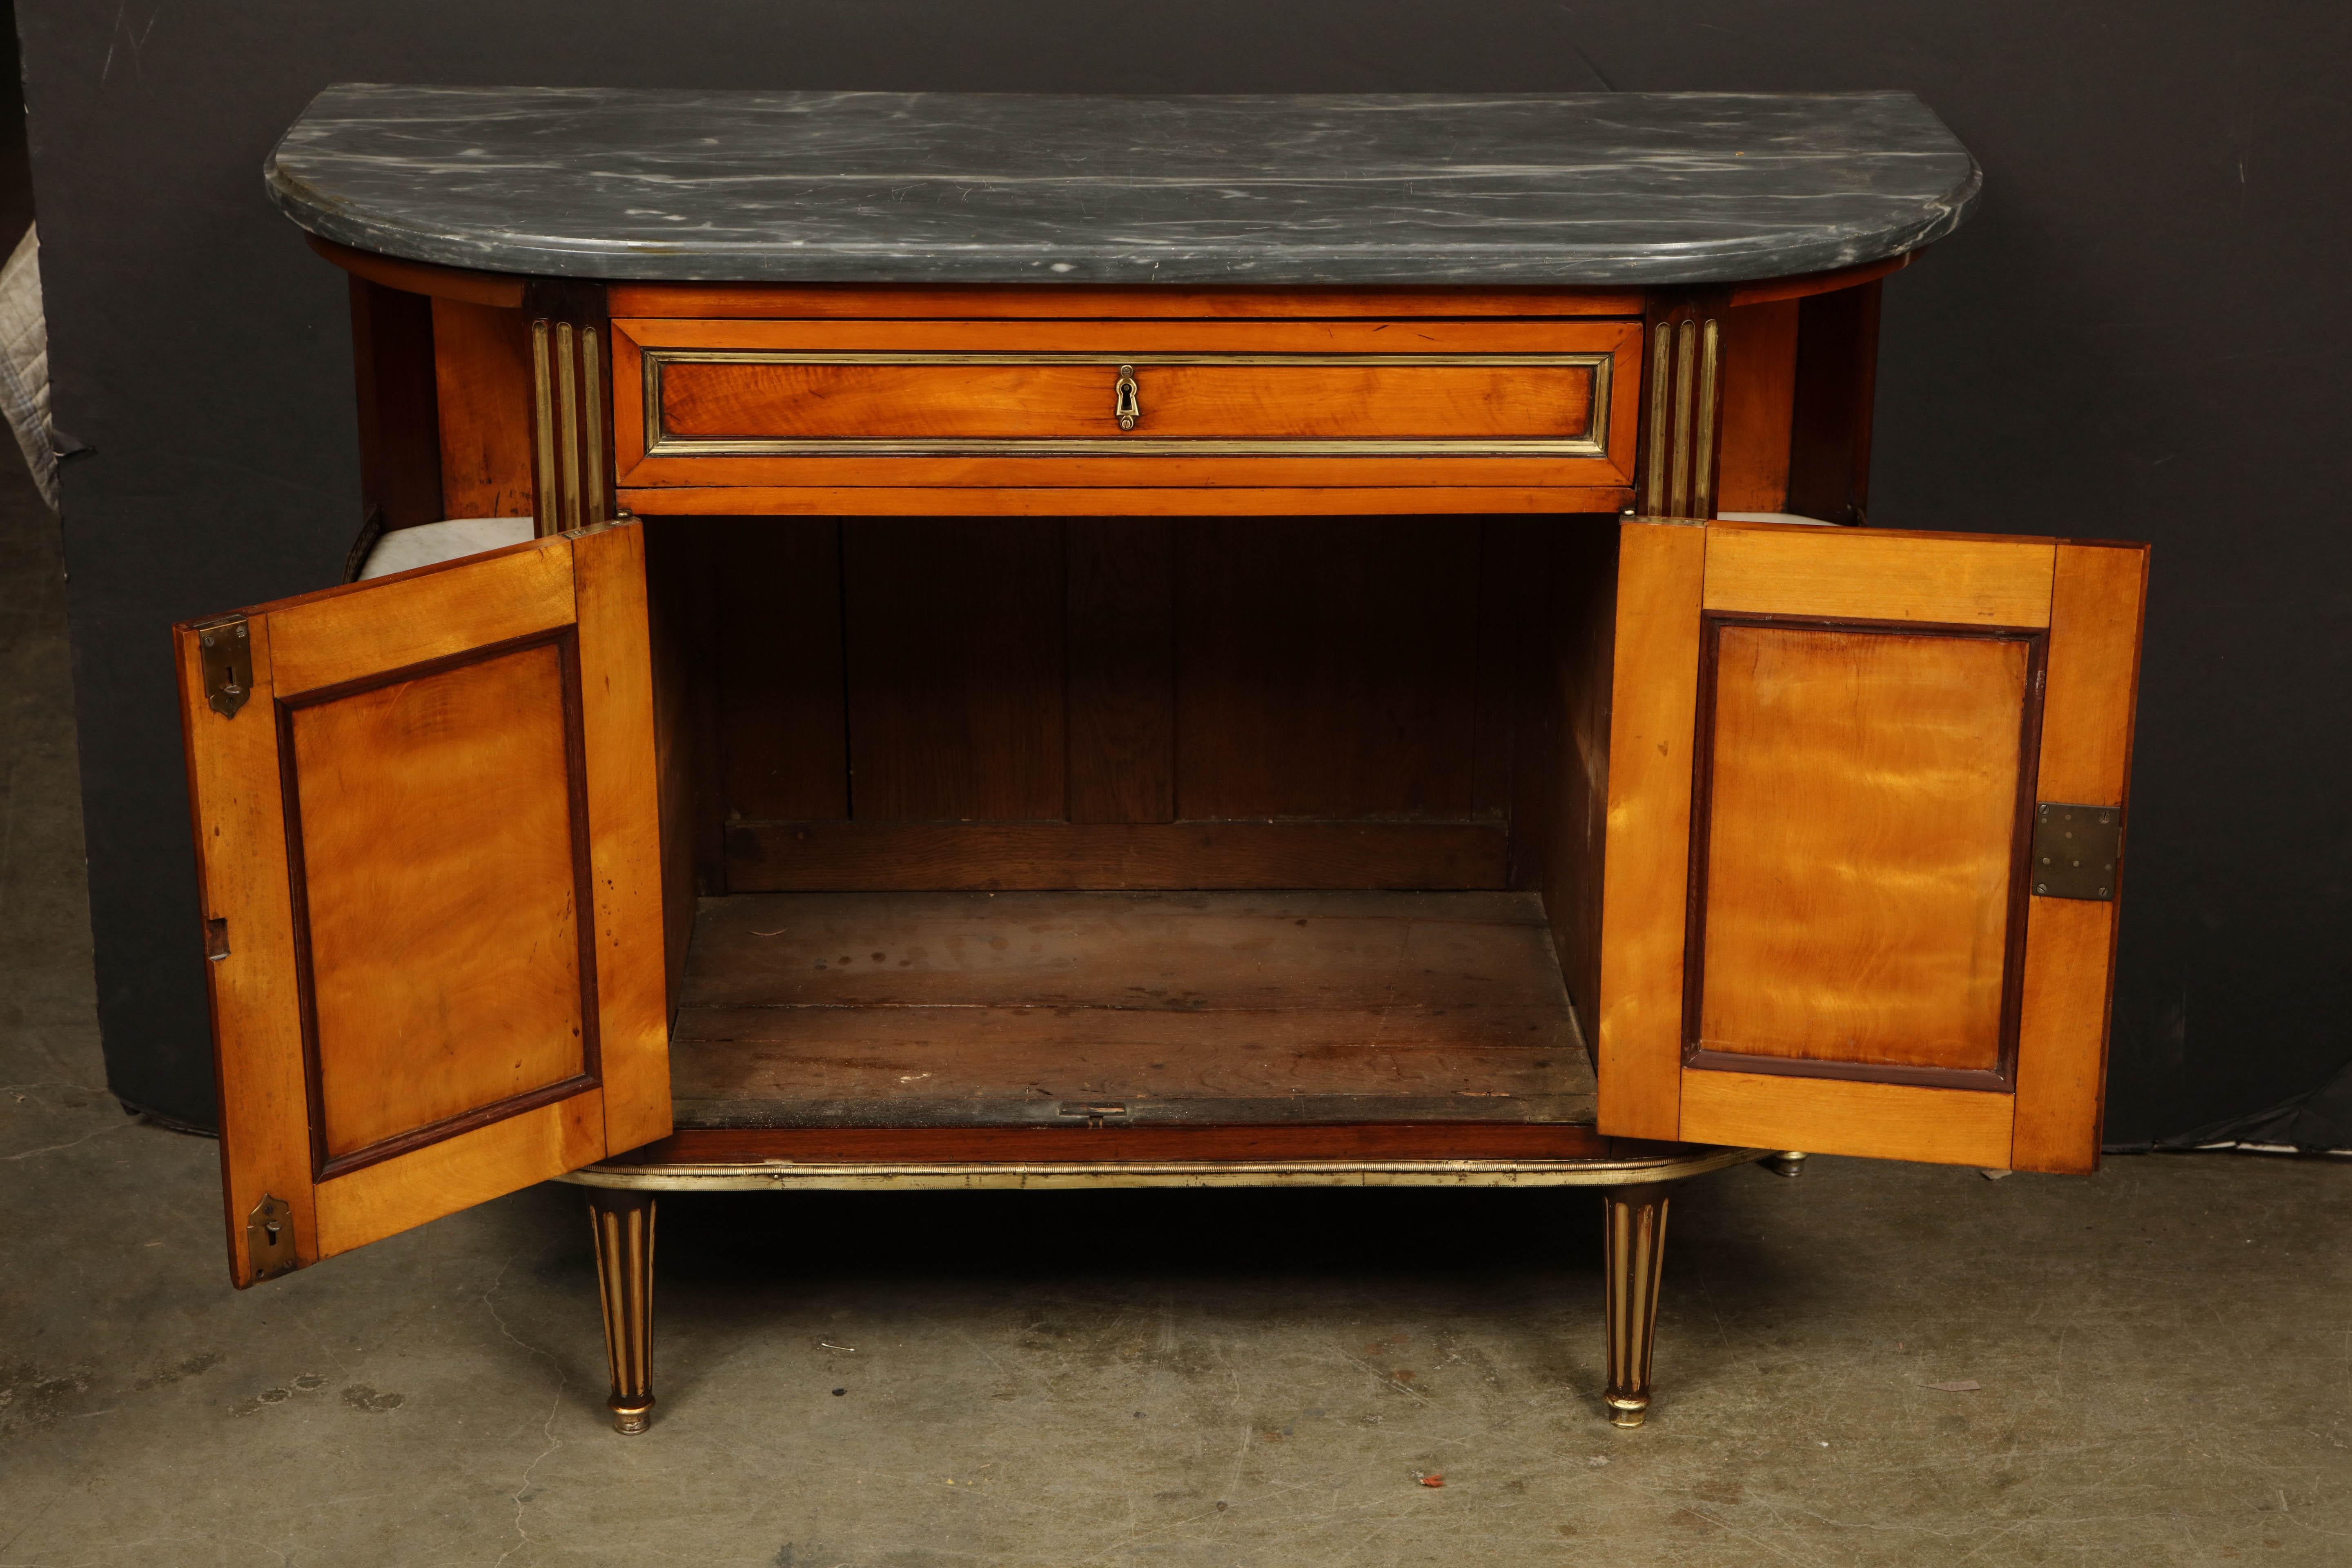 Louis XVI Marble-Top Cabinet (Holz)